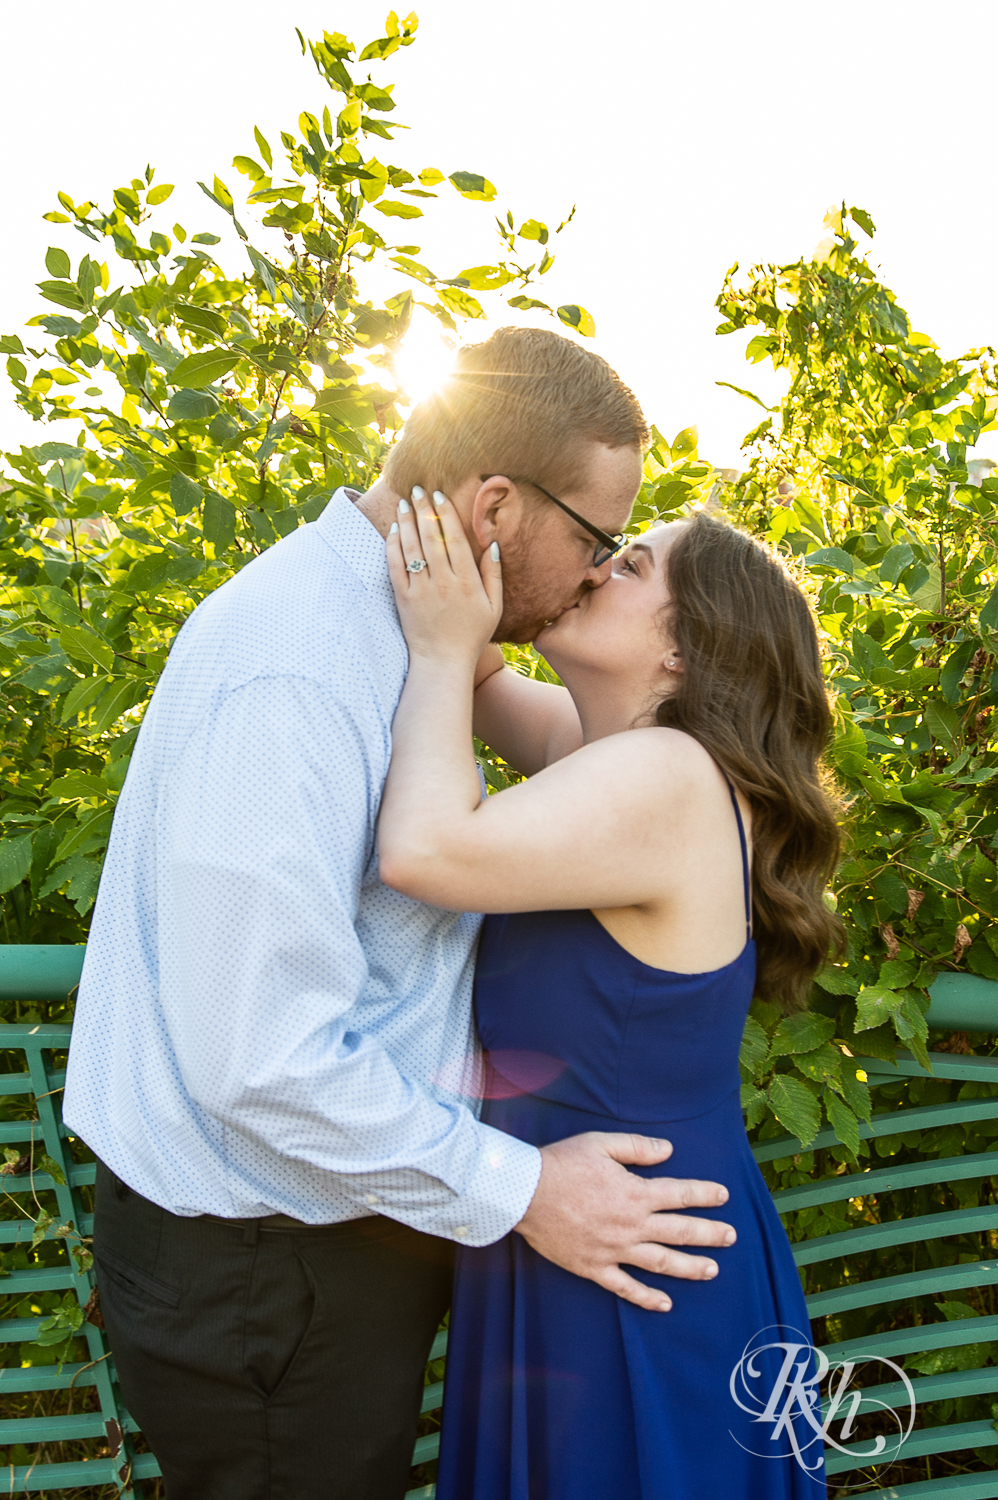 Man in glasses and woman in blue dress kiss during golden hour on Harriet Island in Saint Paul, Minnesota.